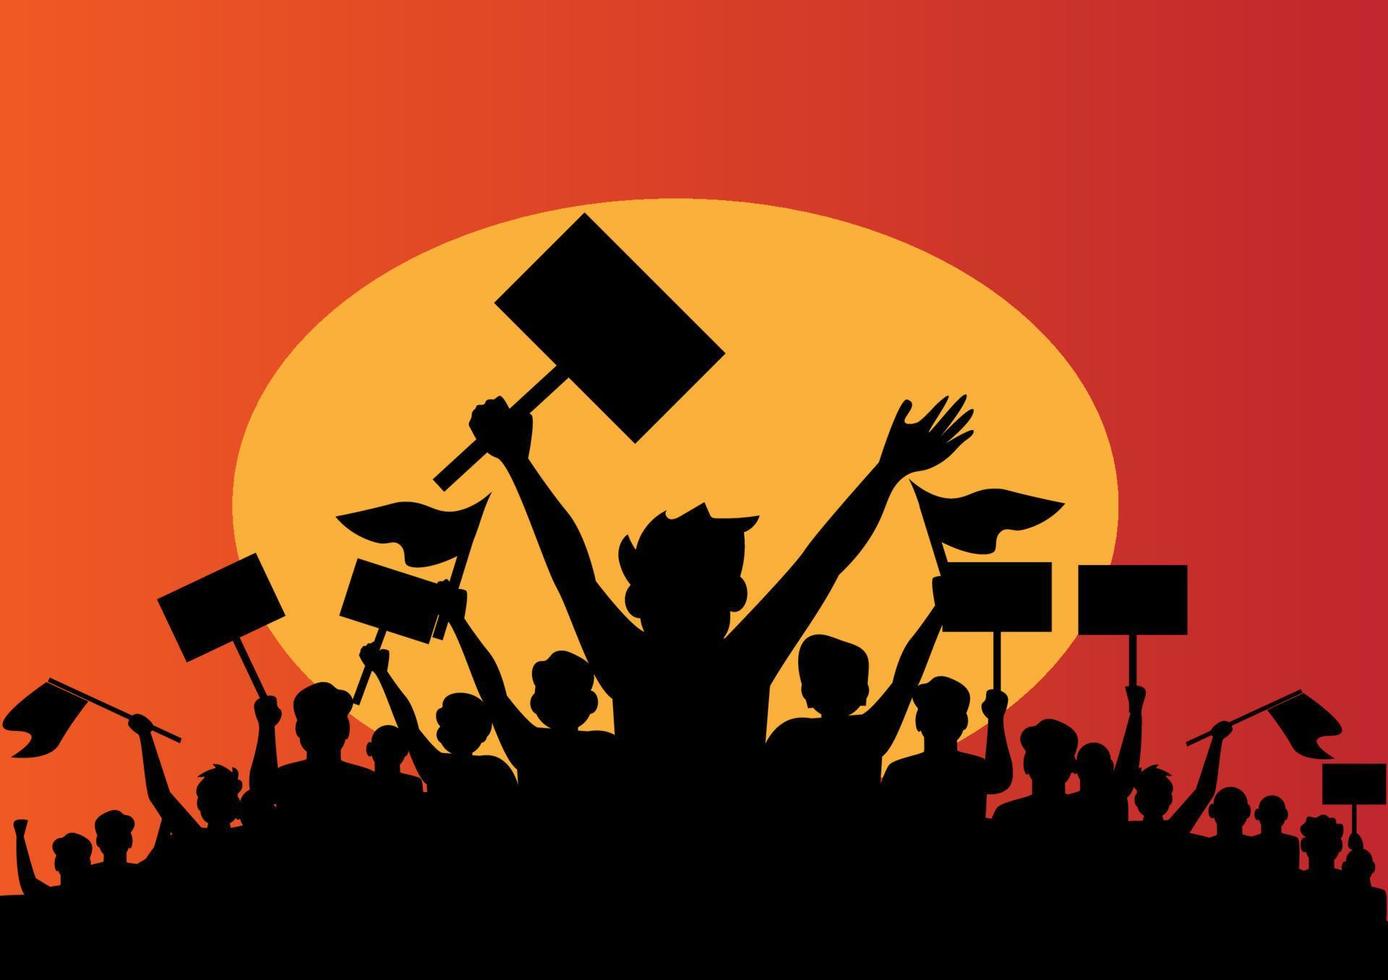 Crowd of protesters people. Silhouettes of people with banners and with raised up hands. Concept of revolution and political or social protest. Flat style cartoon illustration vector